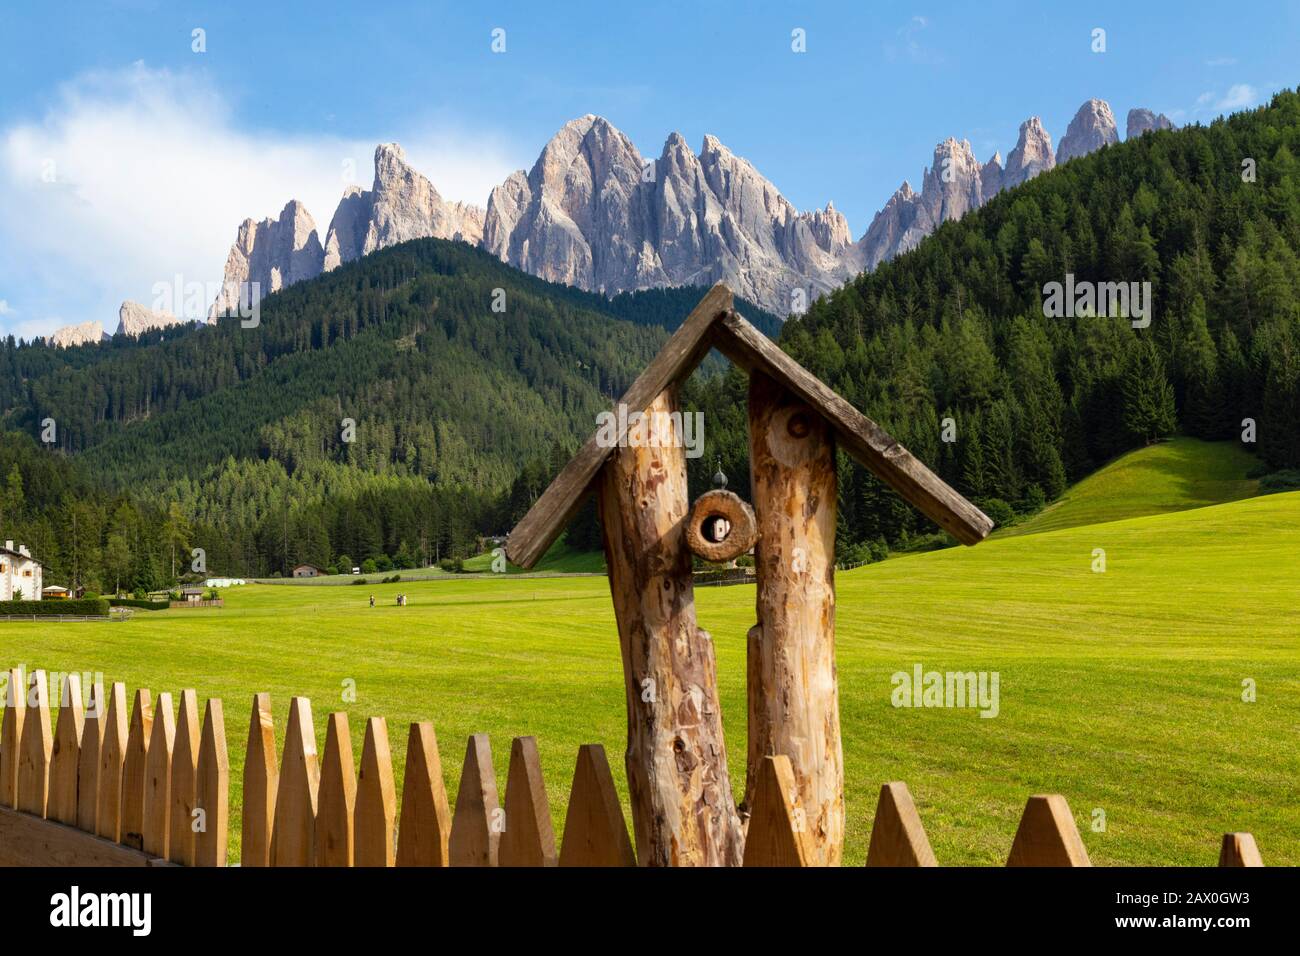 The mountainous area of Dolomites holds spectacular places like the Church of St Johann (also known as San Giovanni) in the Funes Valley. It is a smal Stock Photo